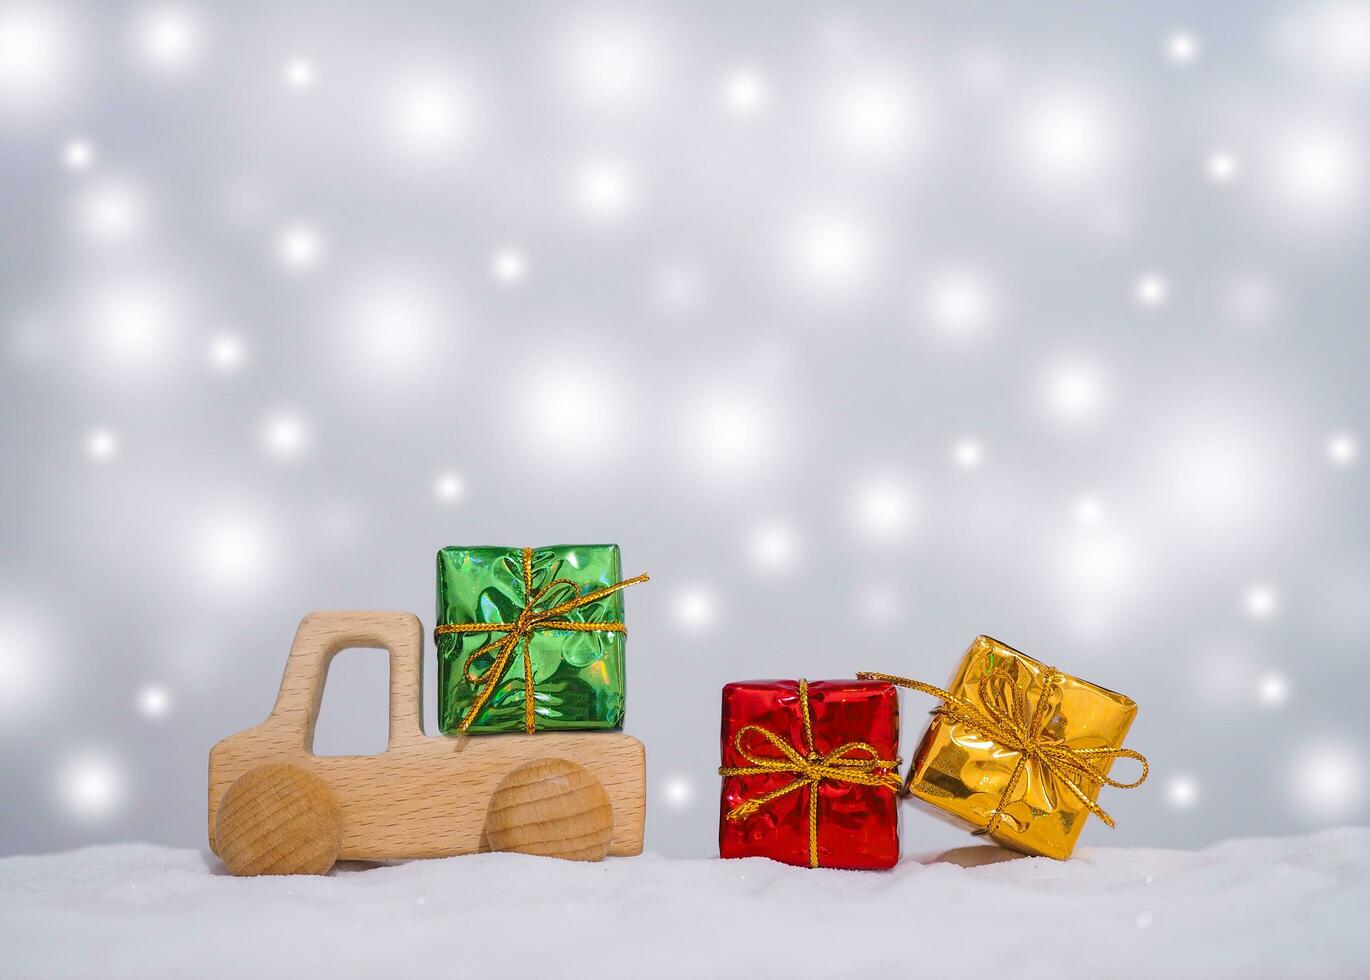 Wooden toy car and gift box with shiny light for Christmas and New Year holidays background, Winter season, falling snow, Copy space for Christmas and New Year holidays greeting card. photo